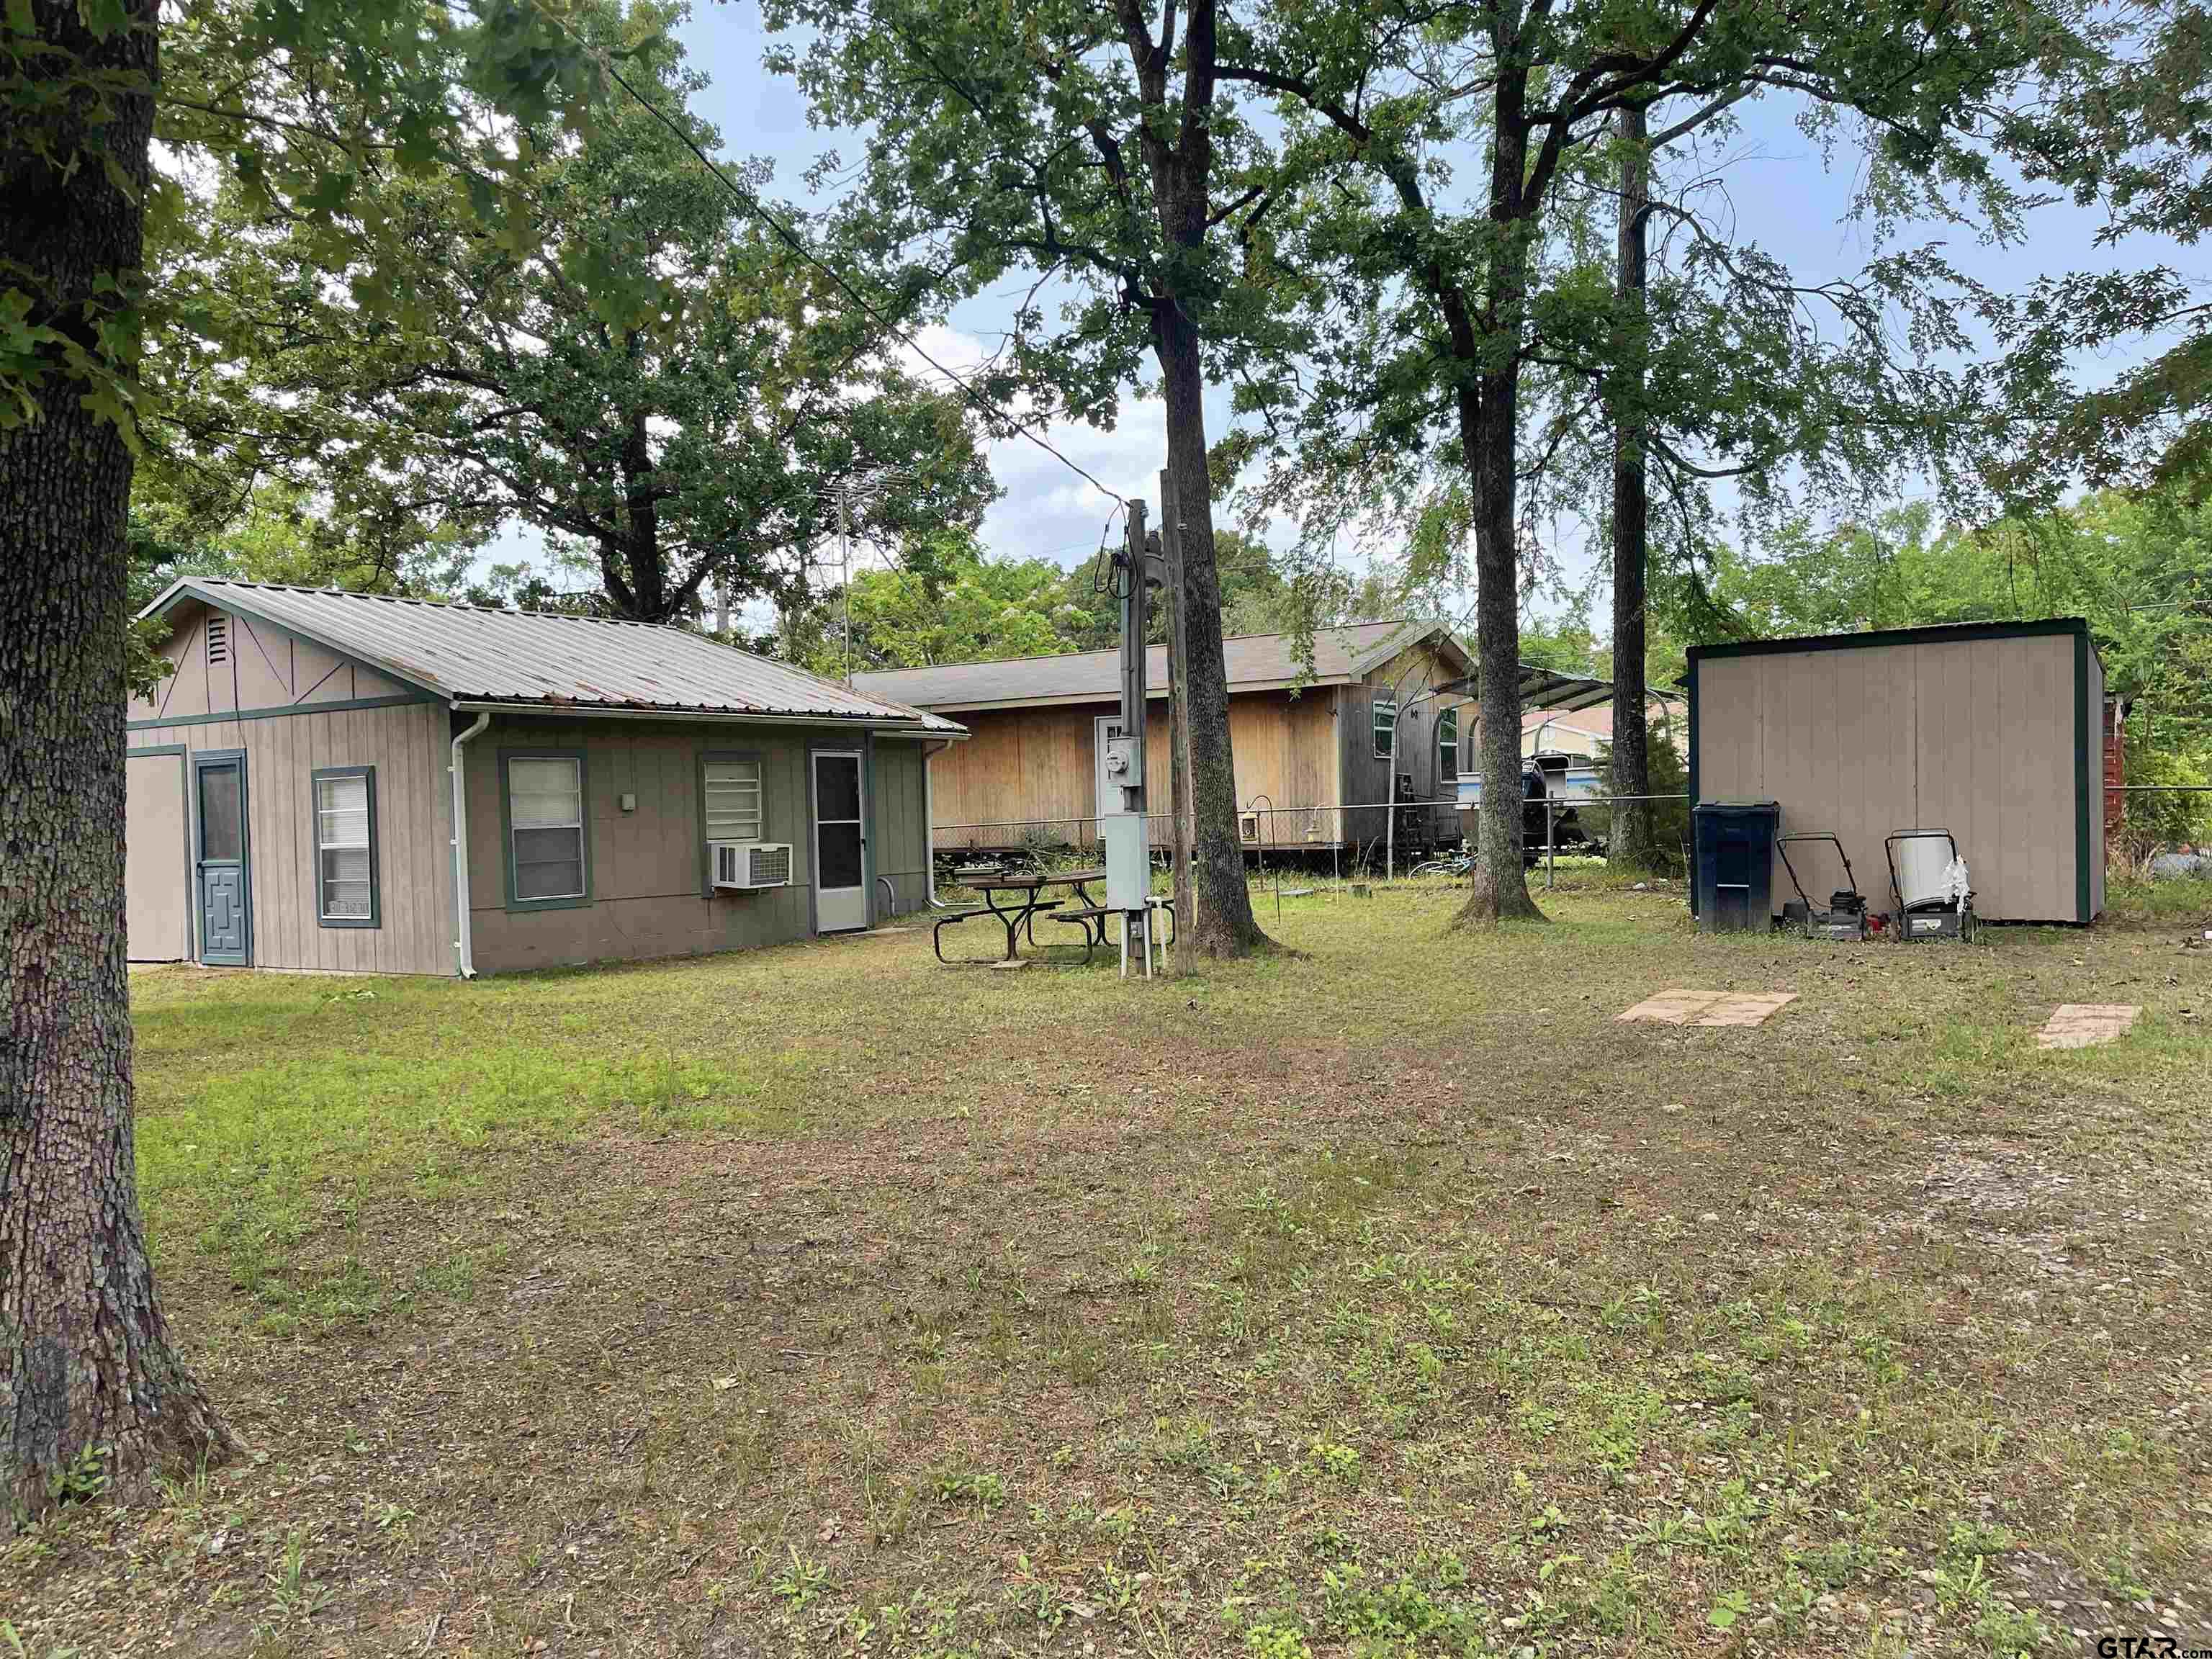 Located in the Lake Fork waterfront community of Steamboat Shores. This is a cozy cottage on 3 fully fenced lots. The cottage features a cozy kitchenette and living-sleeping area. The bathroom are is large and in midst of remodel which the buyer will need to complete. There is a golf cart garage attached to the cottage and an additional storage shed. Steamboat Shores features it’s own private fishing ramp and dock for homeowners, as well as community pool and clubhouse.